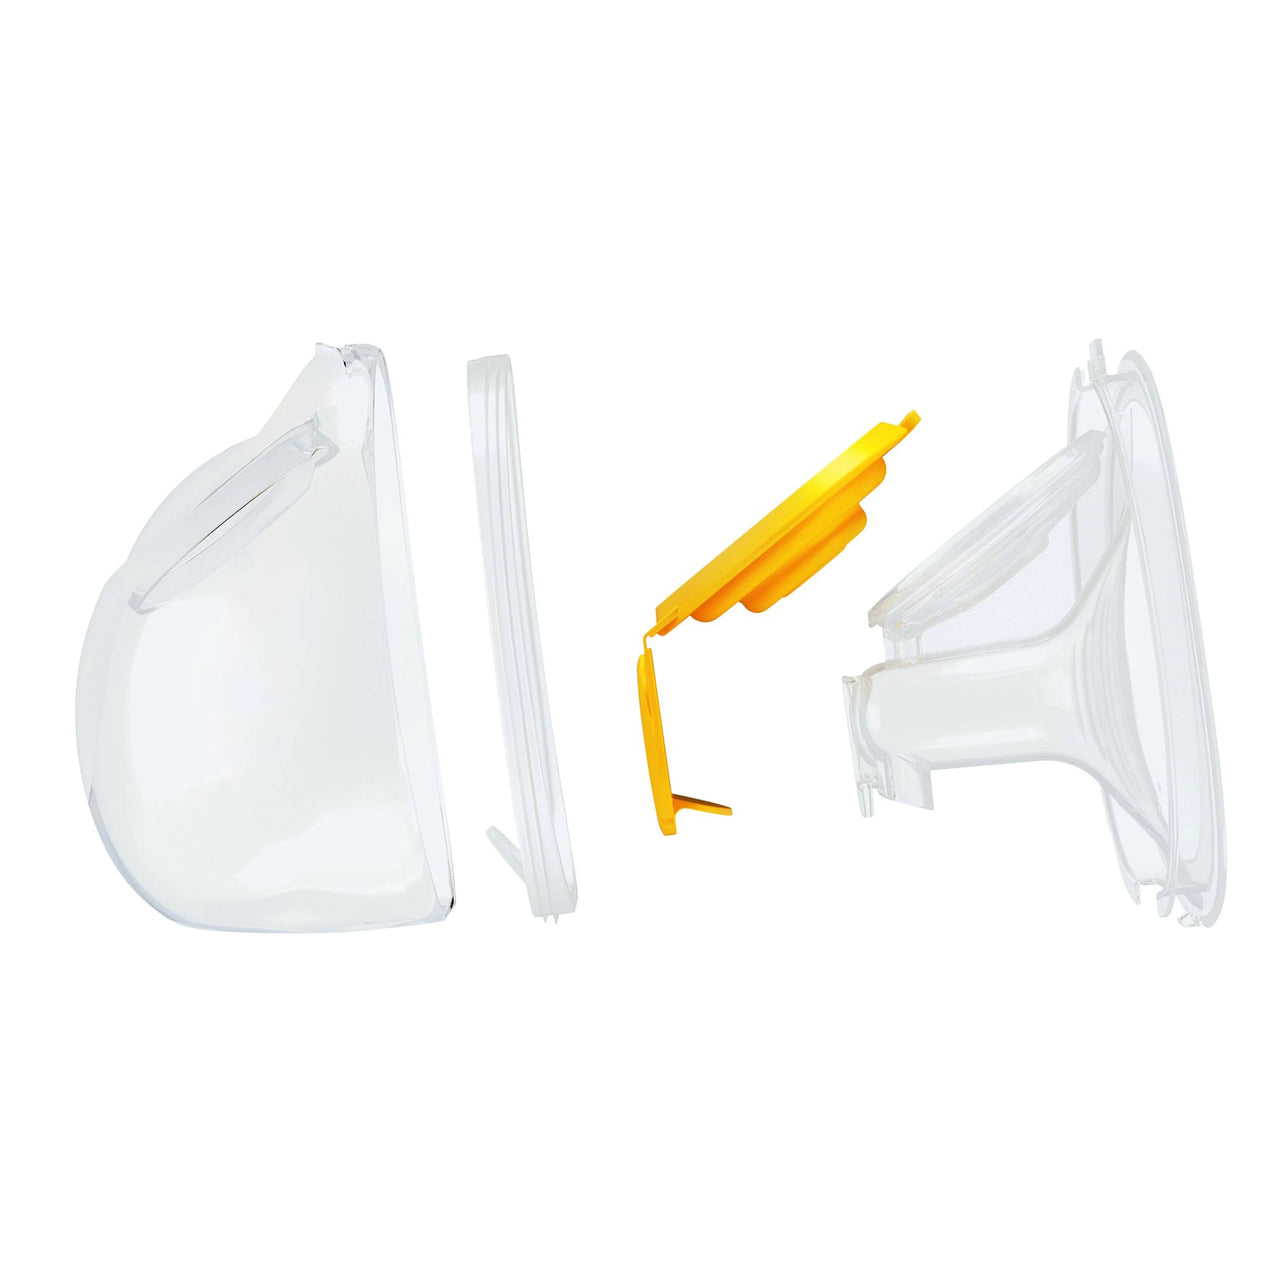 Medela Freestyle Hands-Free Electric Breast Pump